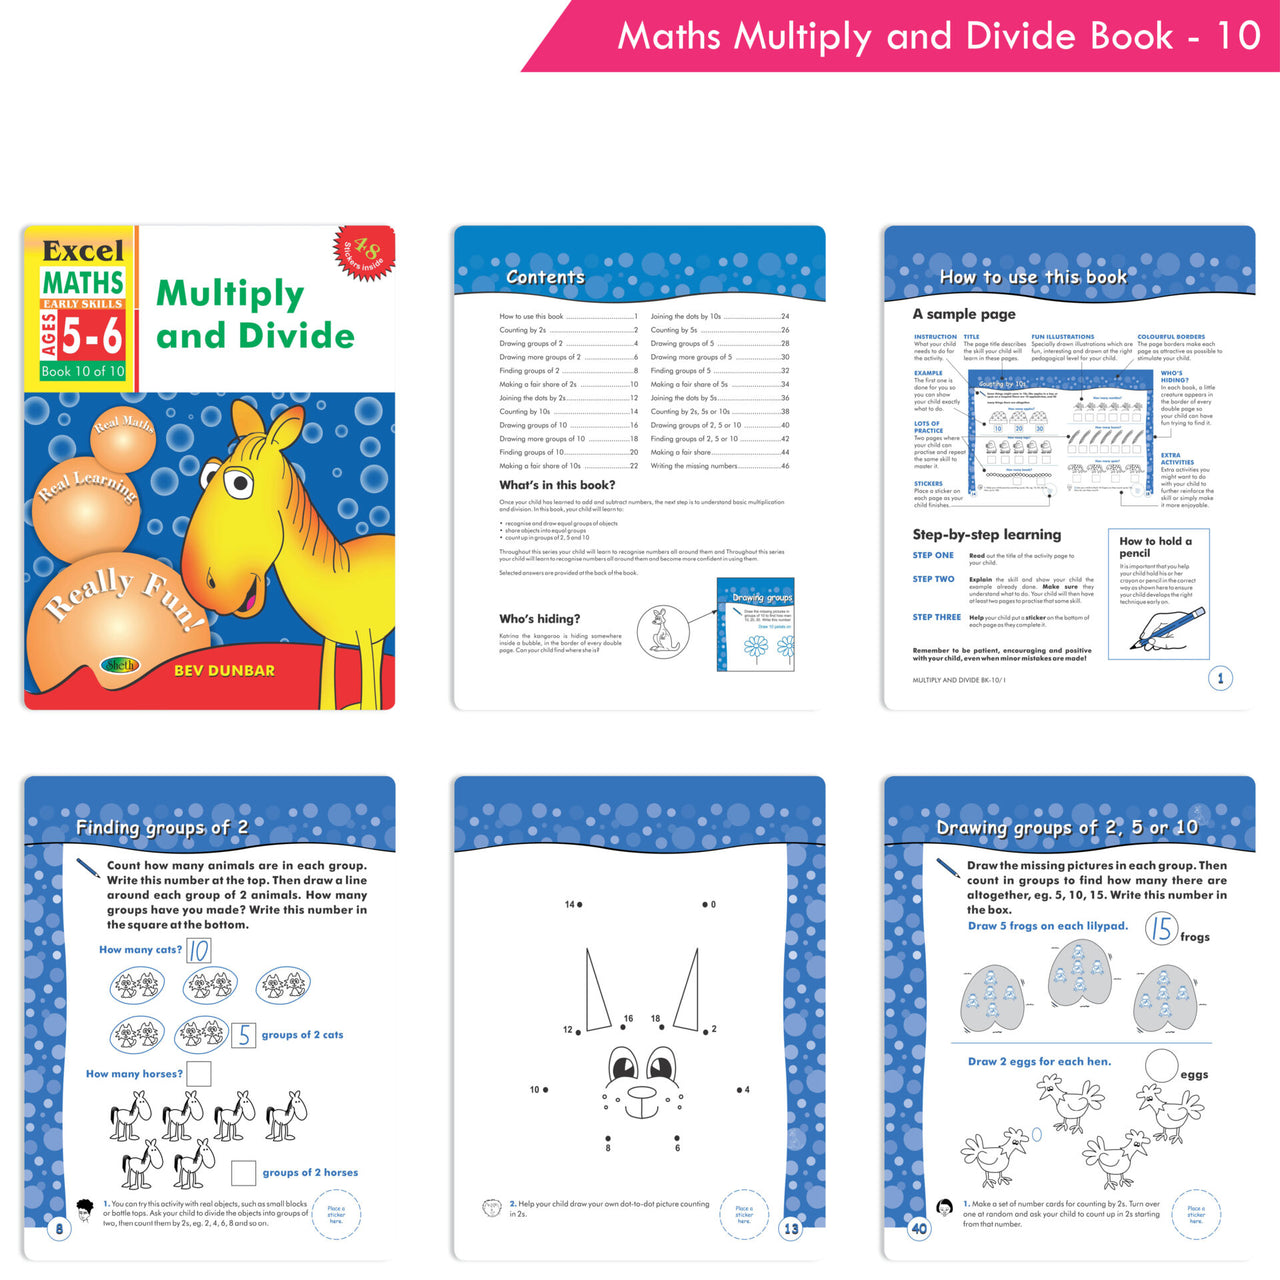 Excel Early Skills English & Maths Books Set of 19| Ages 3-6 Years| Learning Alphabet, Numbers, Patterns etc. - Distacart